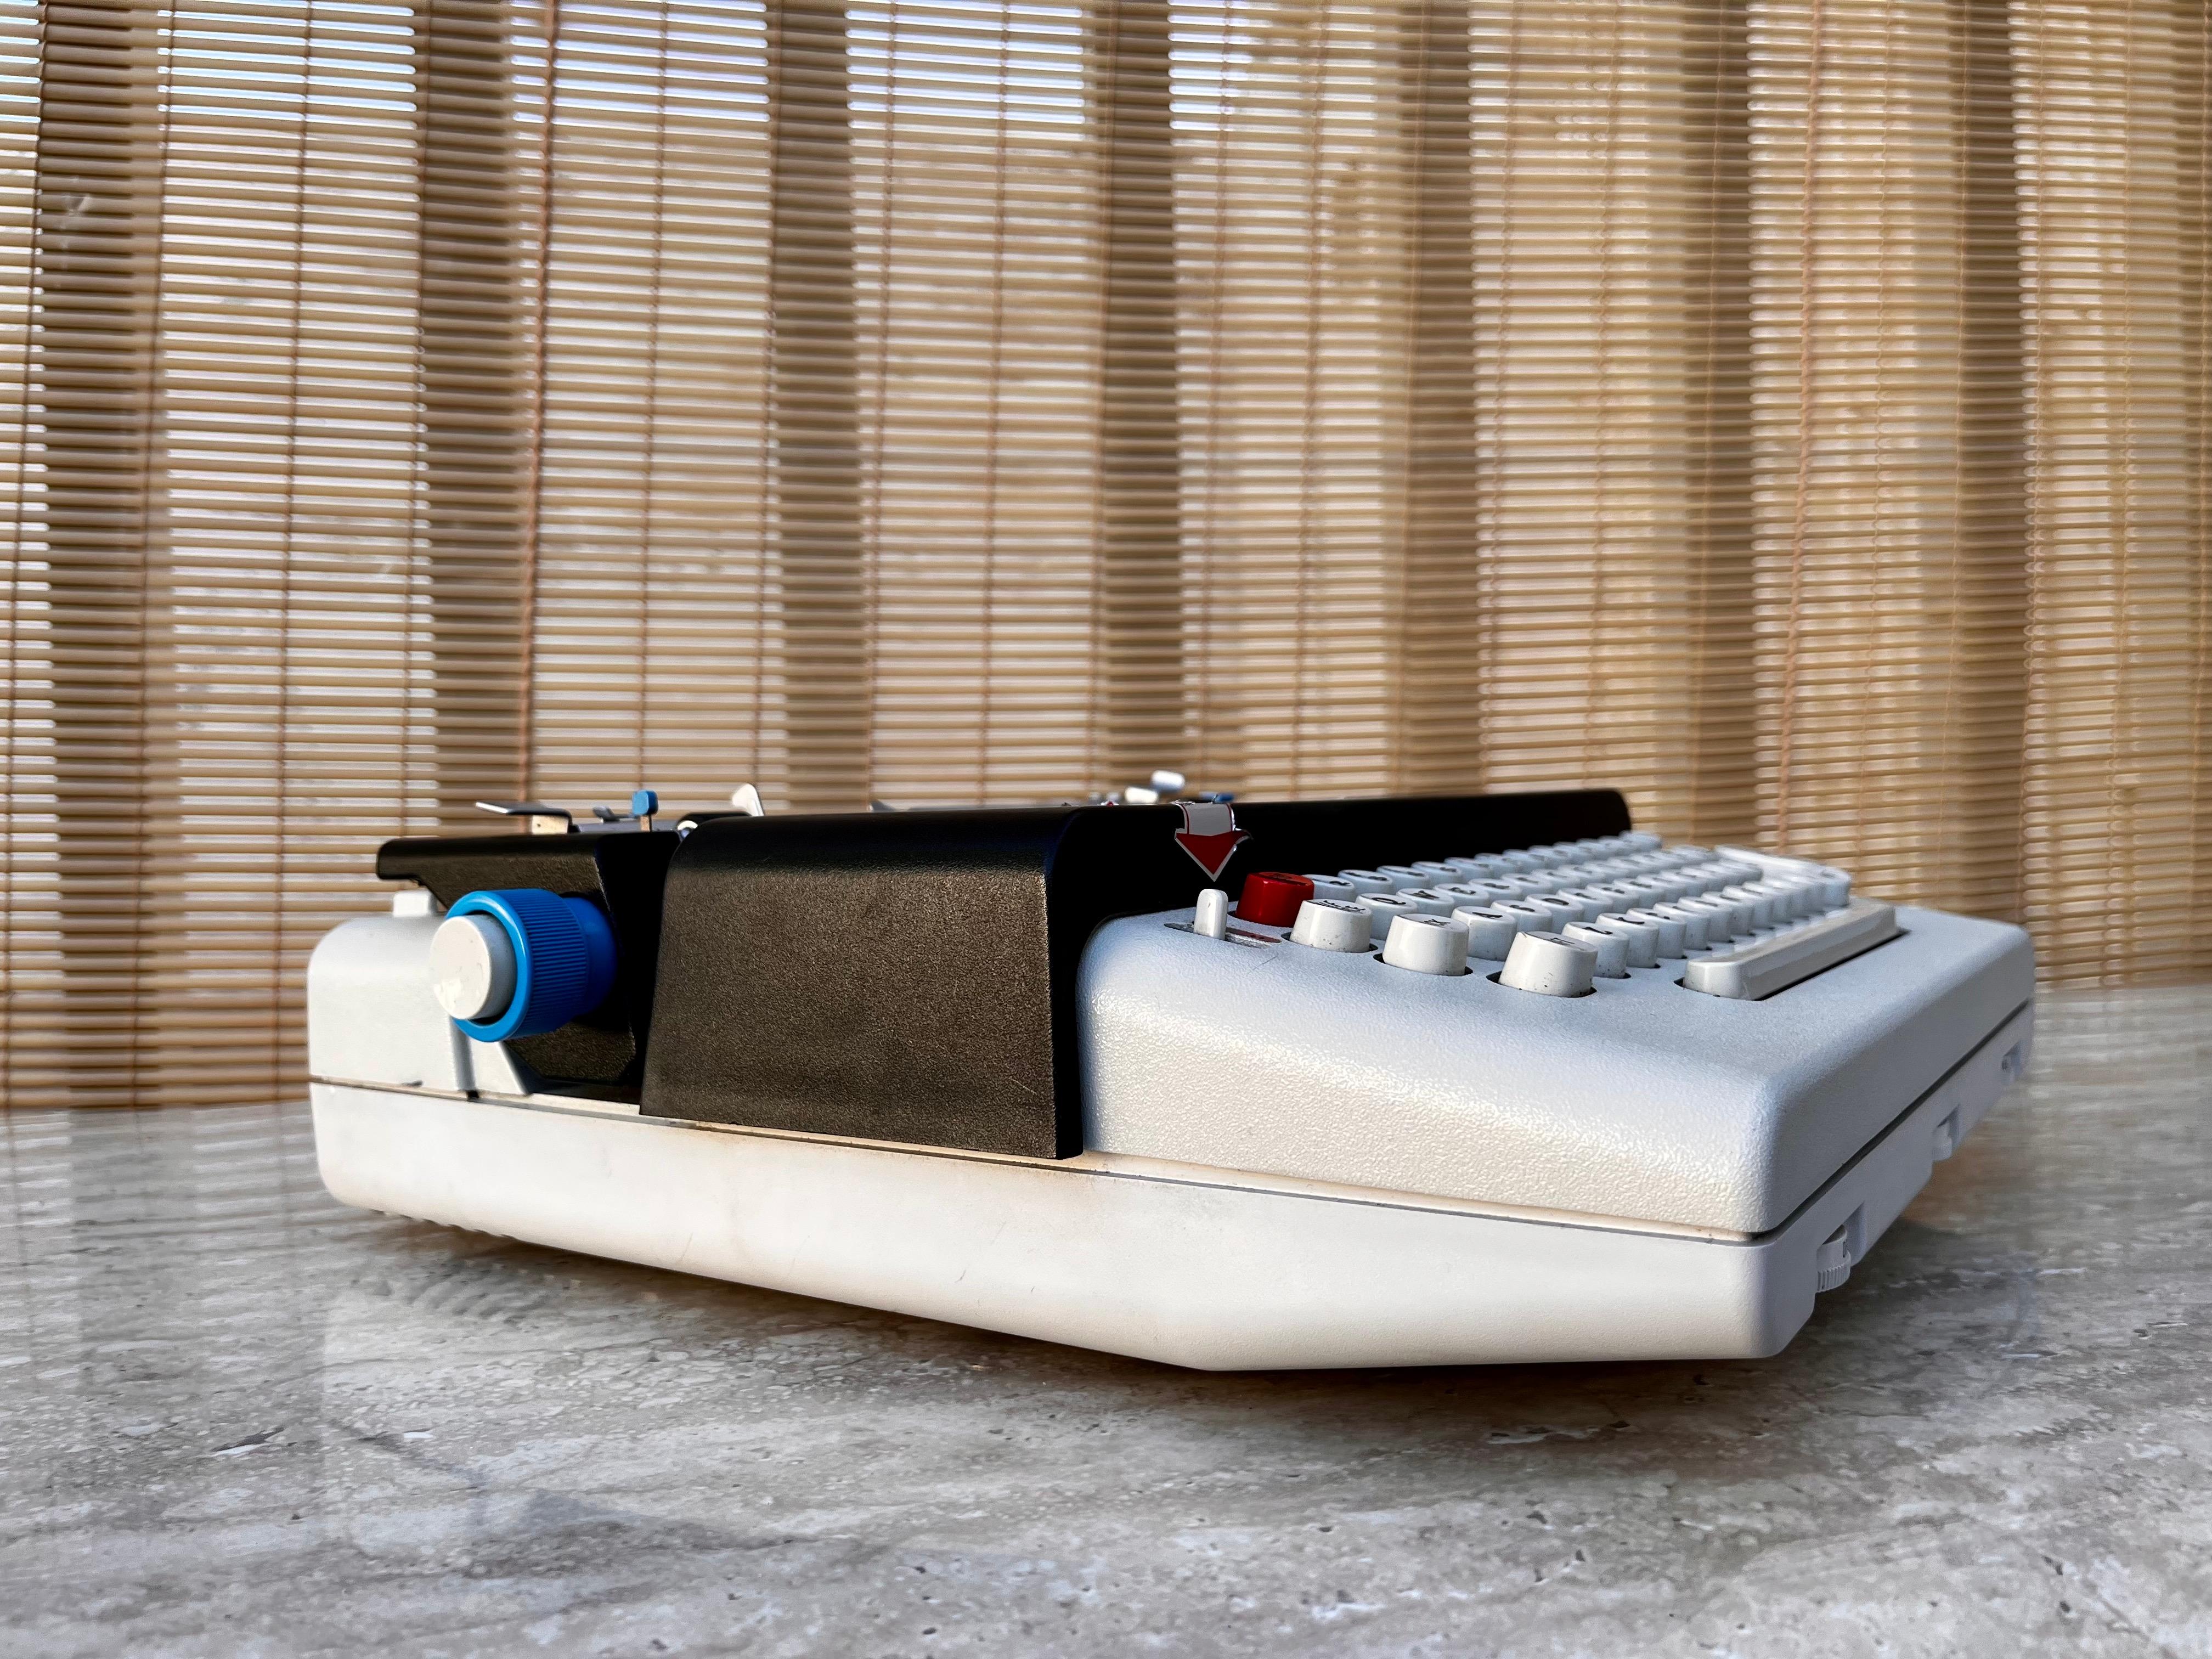 Olivetti Lettera 36 Portable Typewriter Designed by Ettore Sottsass. circa 1970s For Sale 4